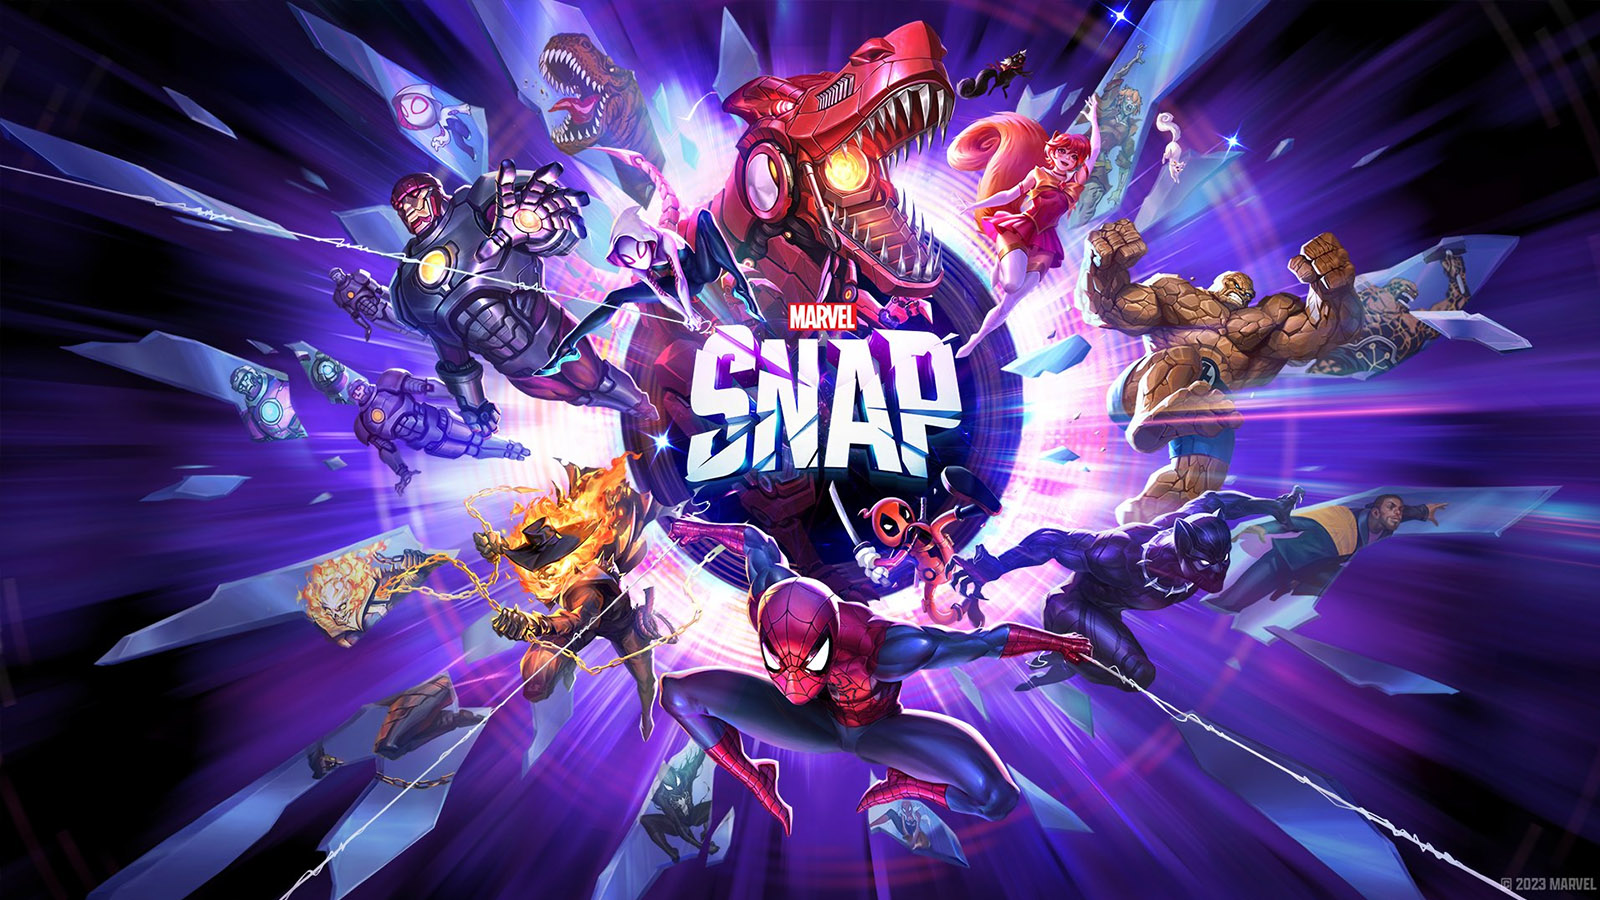 Marvel Snap is an epic new multiverse card game for iPhone and Android